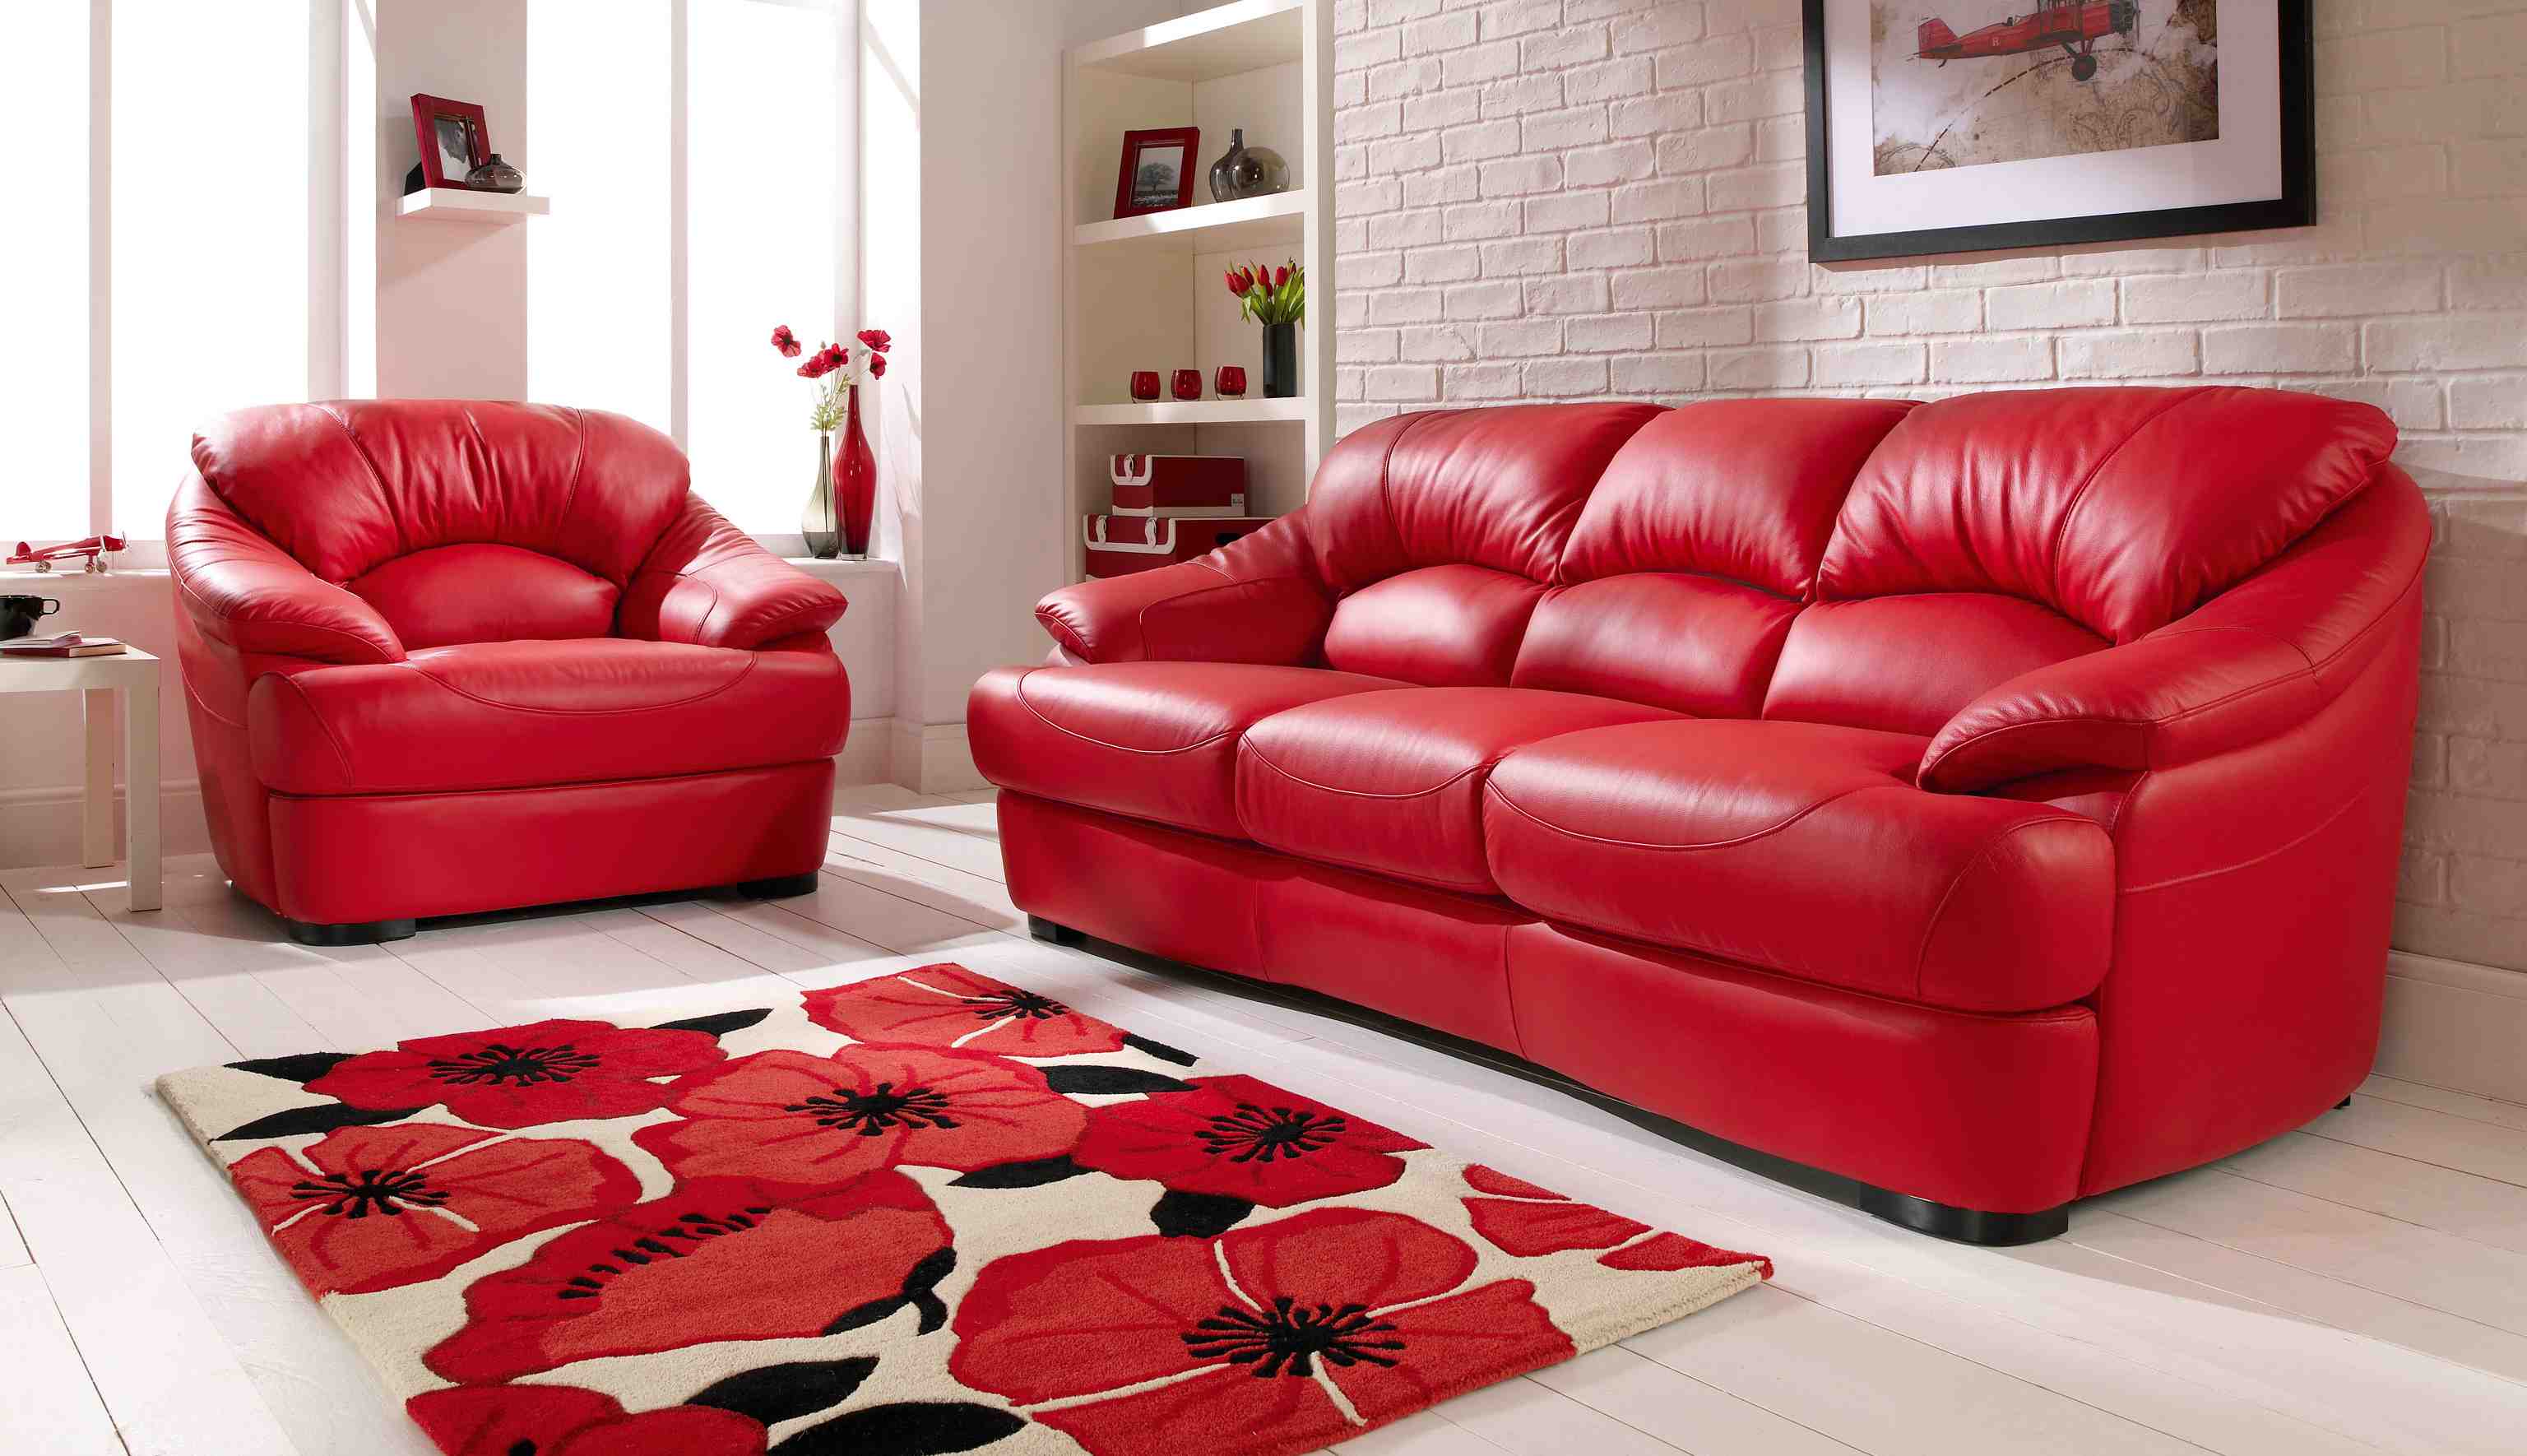 Modern Living Crimson Wonderful Modern Living Room With Crimson Red Leather Sofa White Wooden Floor And Several White Colored Wooden Shelf Office & Workspace Outstanding Living Room Furnished With A Red Leather Couch Or Sofa Sets